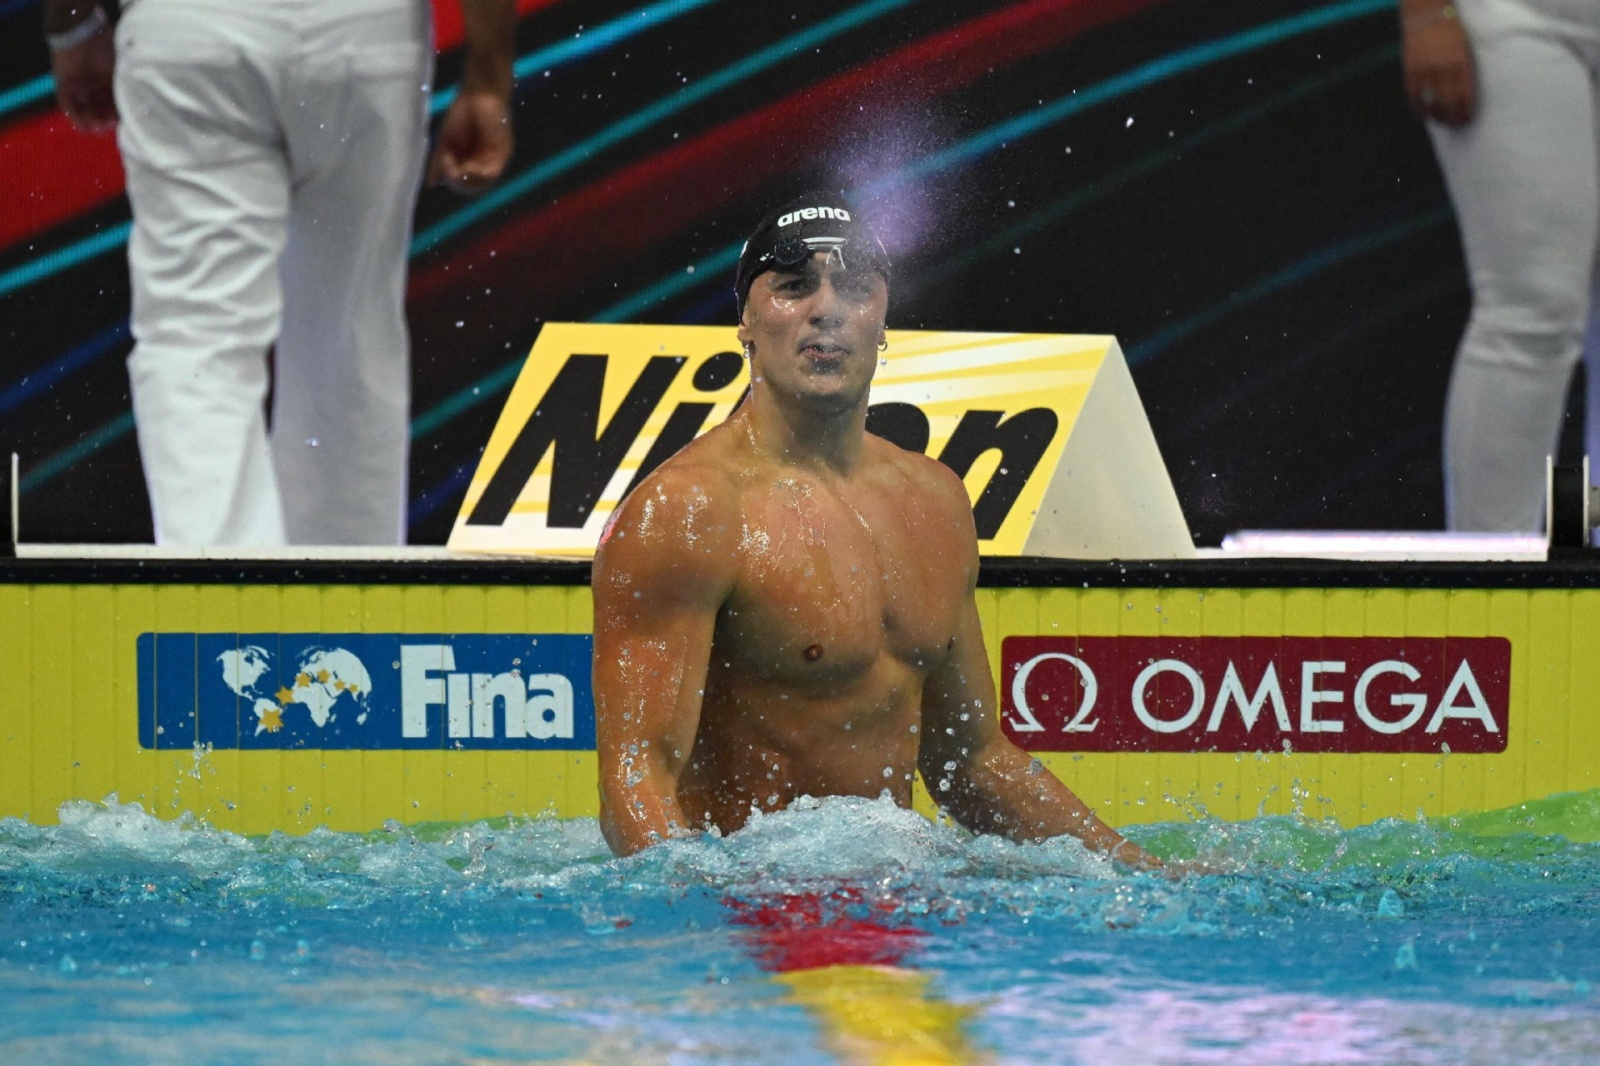 epa10022449 Nicolo Martinenghi of Italy reacts after winning the men's 100m Breaststroke final of the Swimming events at the 19th FINA World Aquatics Championships in Budapest, Hungary, 19 June 2022. EPA/Tibor Illyes HUNGARY OUT